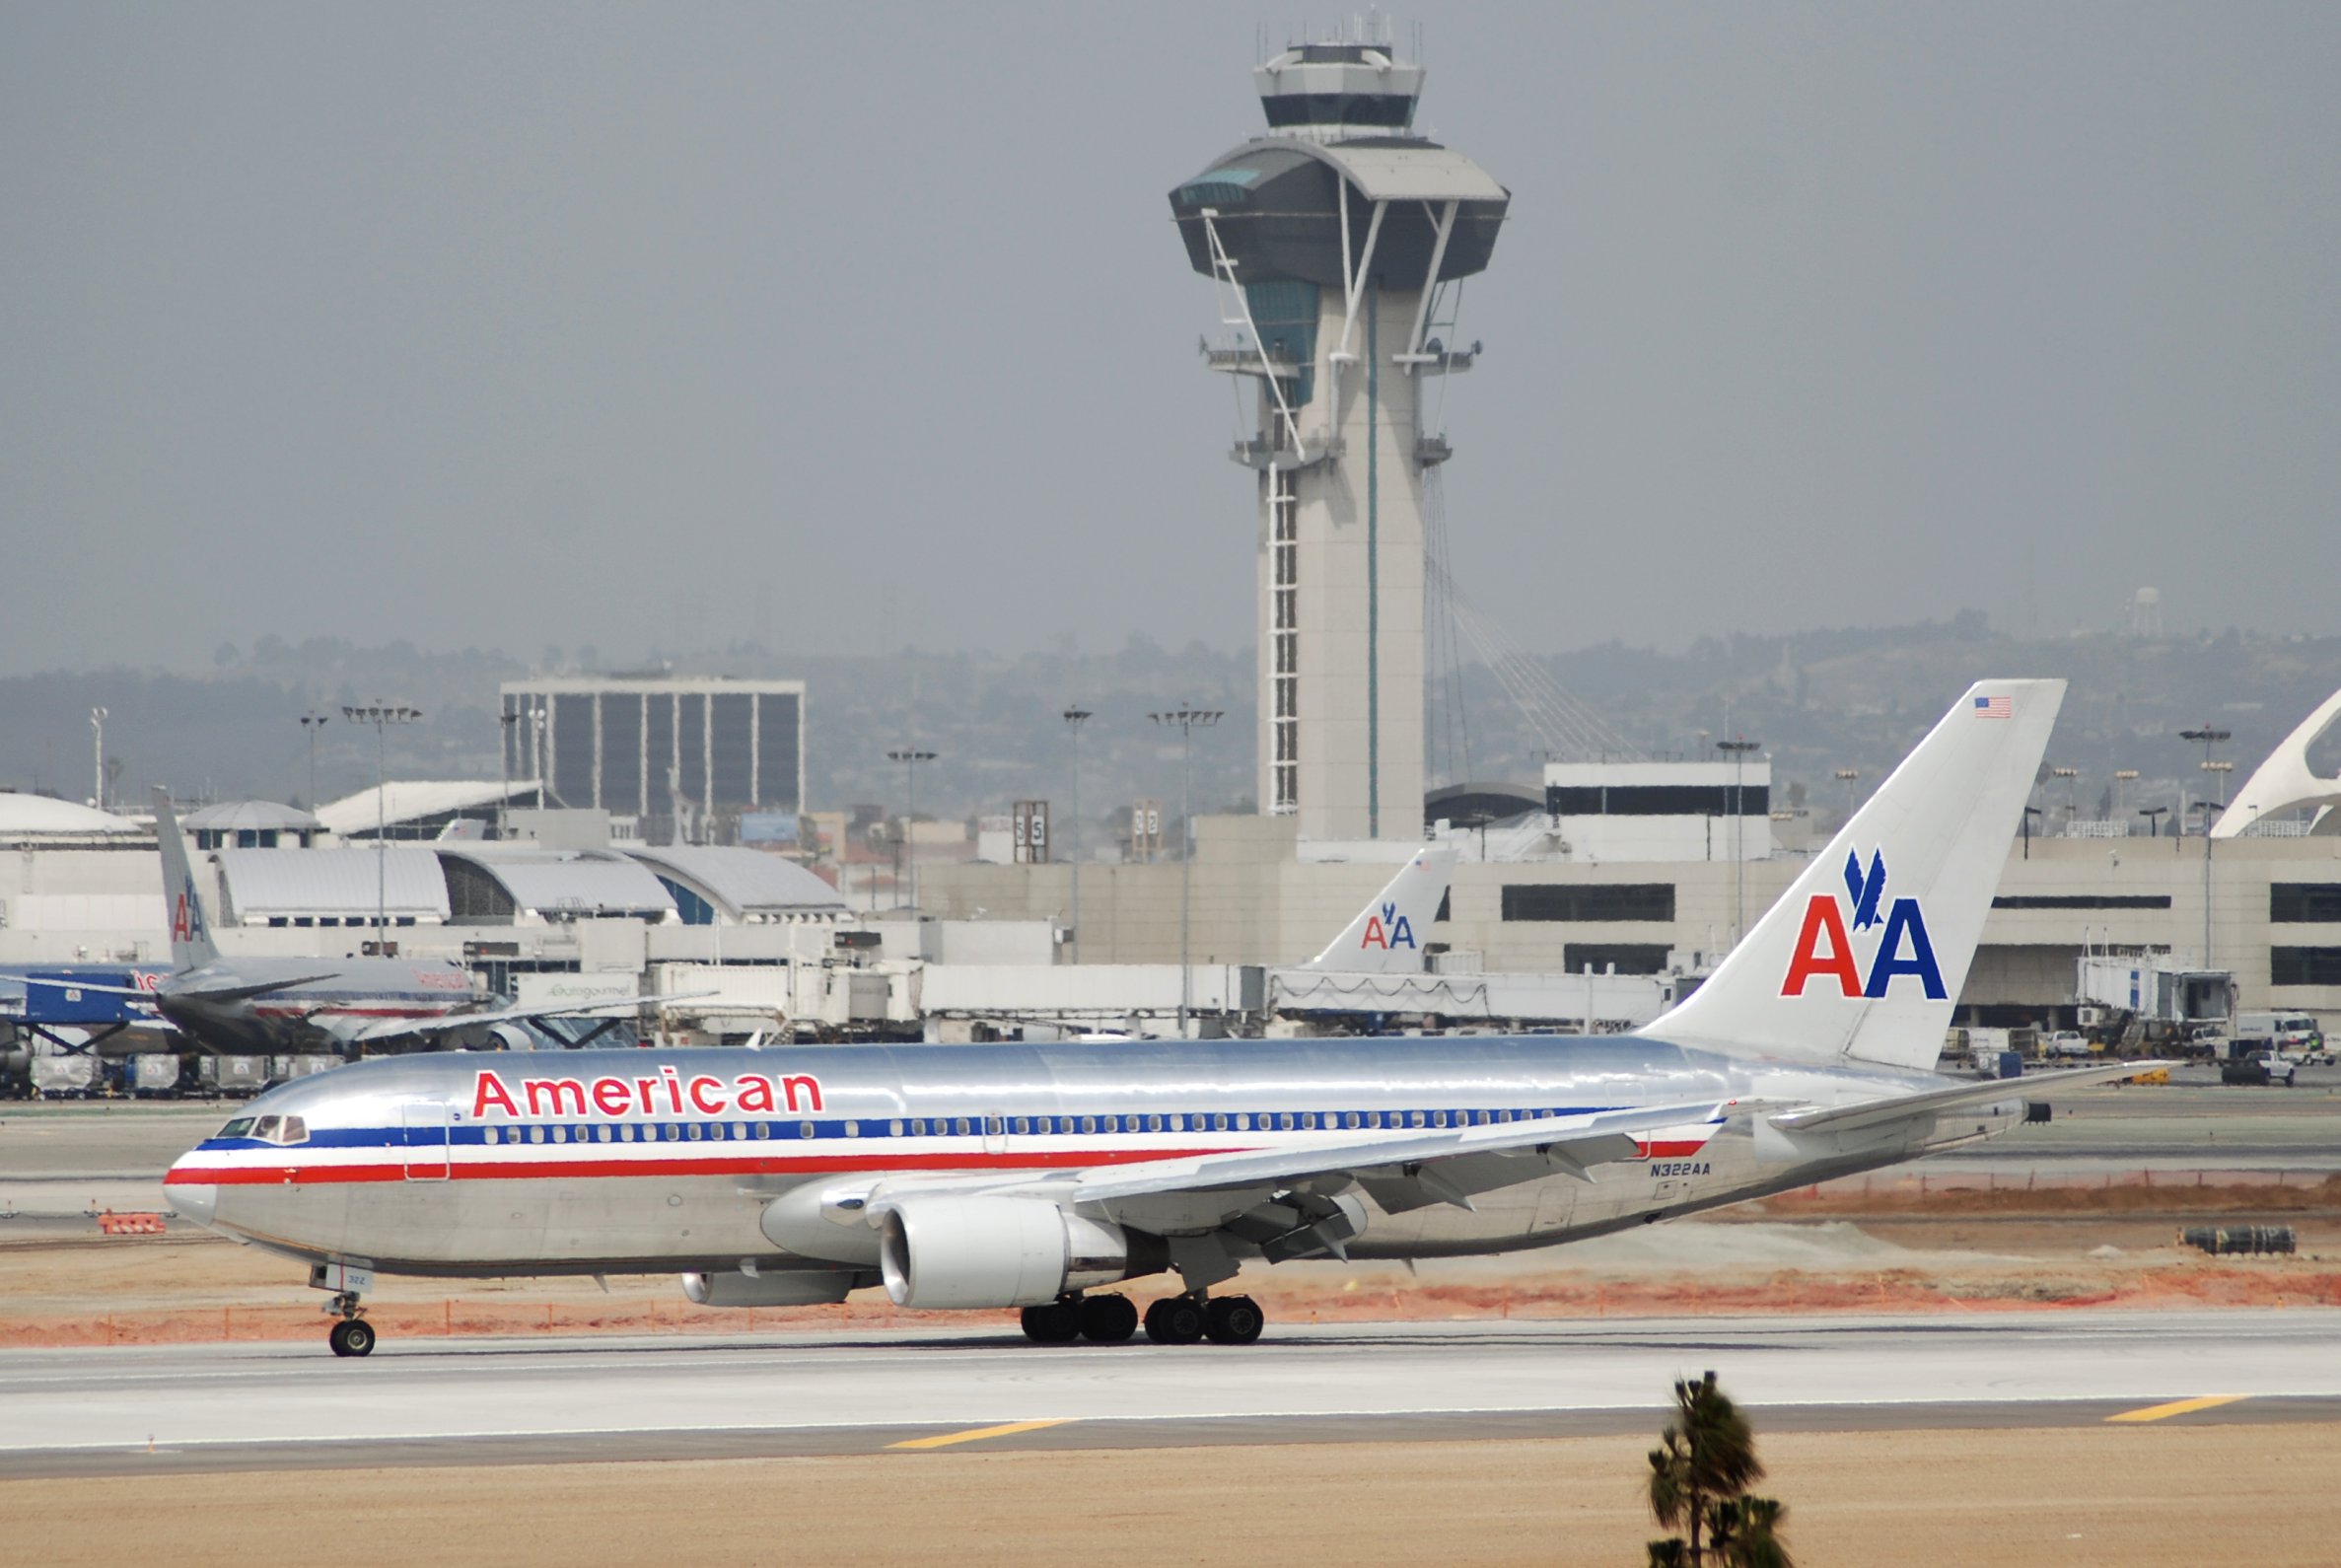 More nonstop flights from LAX on American Airlines